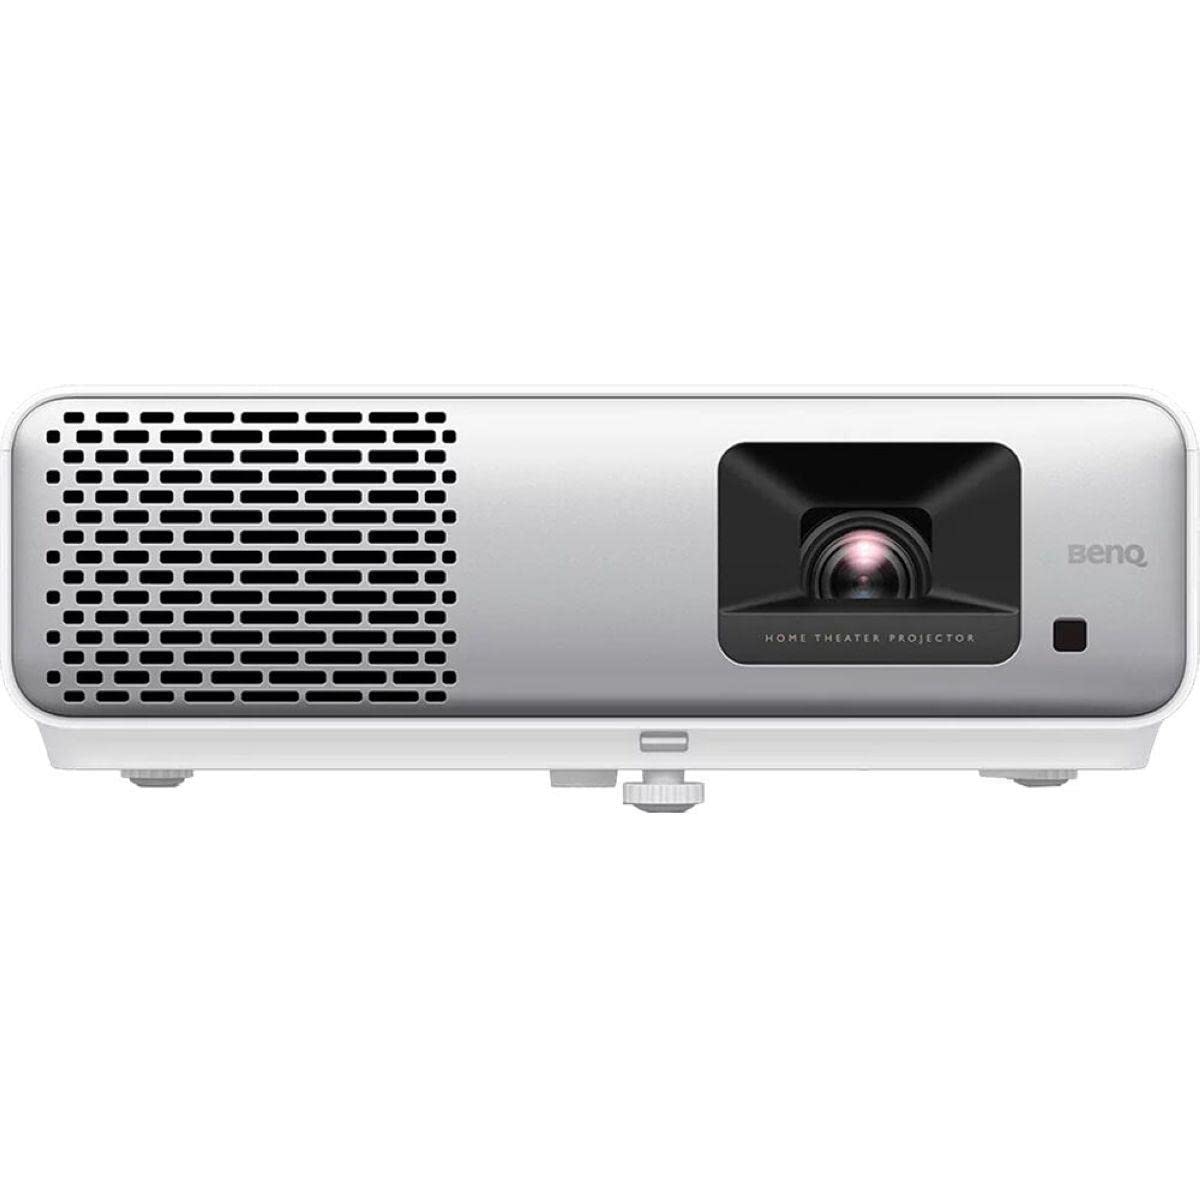 BenQ HT2060 1080p HDR LED Home Theater Projector, DCI-P3 Rec.709 Wide Color Gamut, 8.3ms 120hz, 2D Keystone, 1.3x Zoom, S/PDIF, HDMI, 2 Speakers, 3D, With Flashpoint Projector Tripod Stand